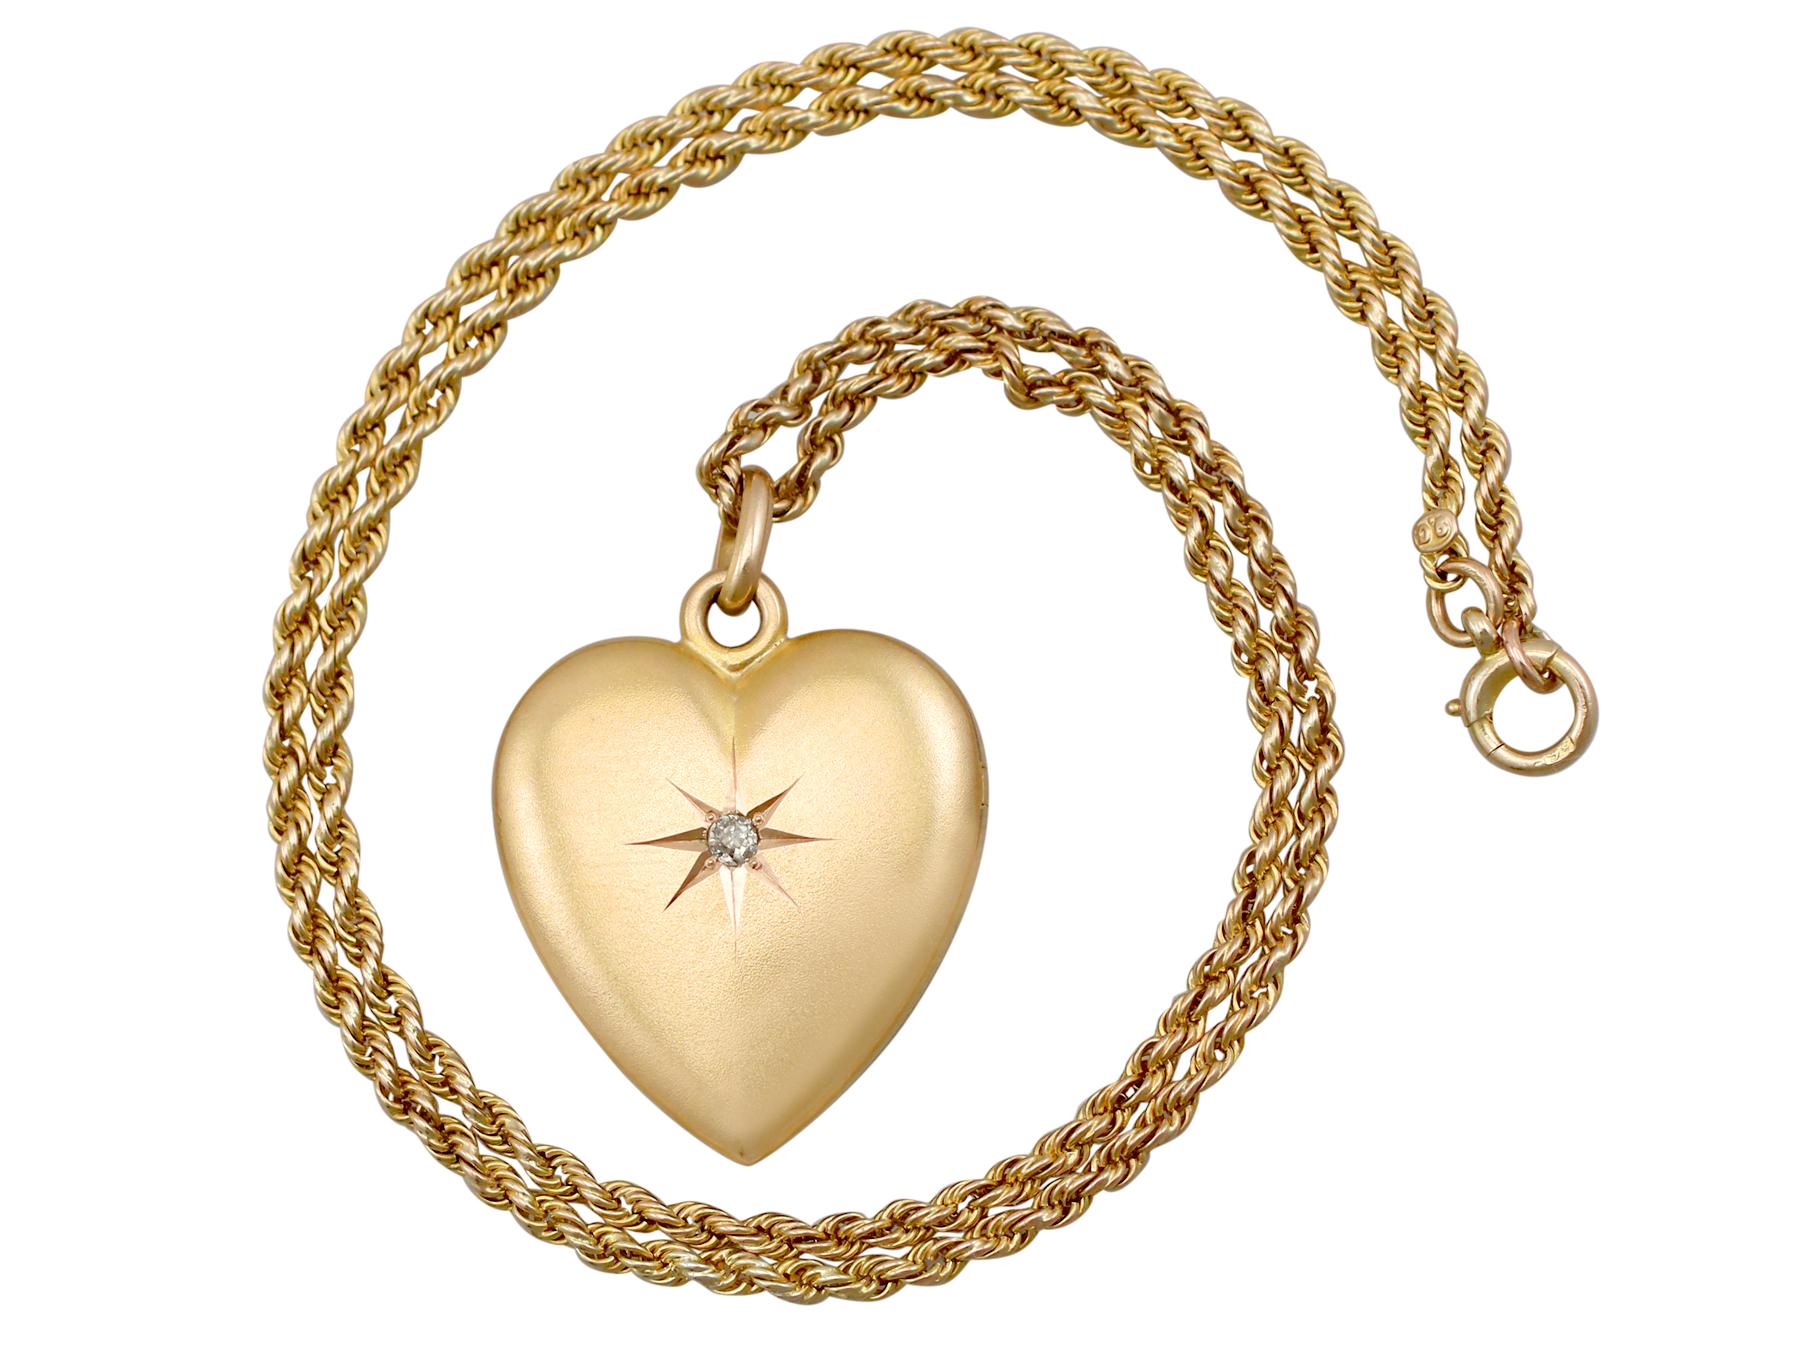 An impressive antique Victorian 0.03 carat diamond and 9 karat yellow gold 'heart' locket and rope chain; part of our diverse antique jewellery and estate jewelry collections.

This fine and impressive Victorian pendant has been crafted in 9k yellow